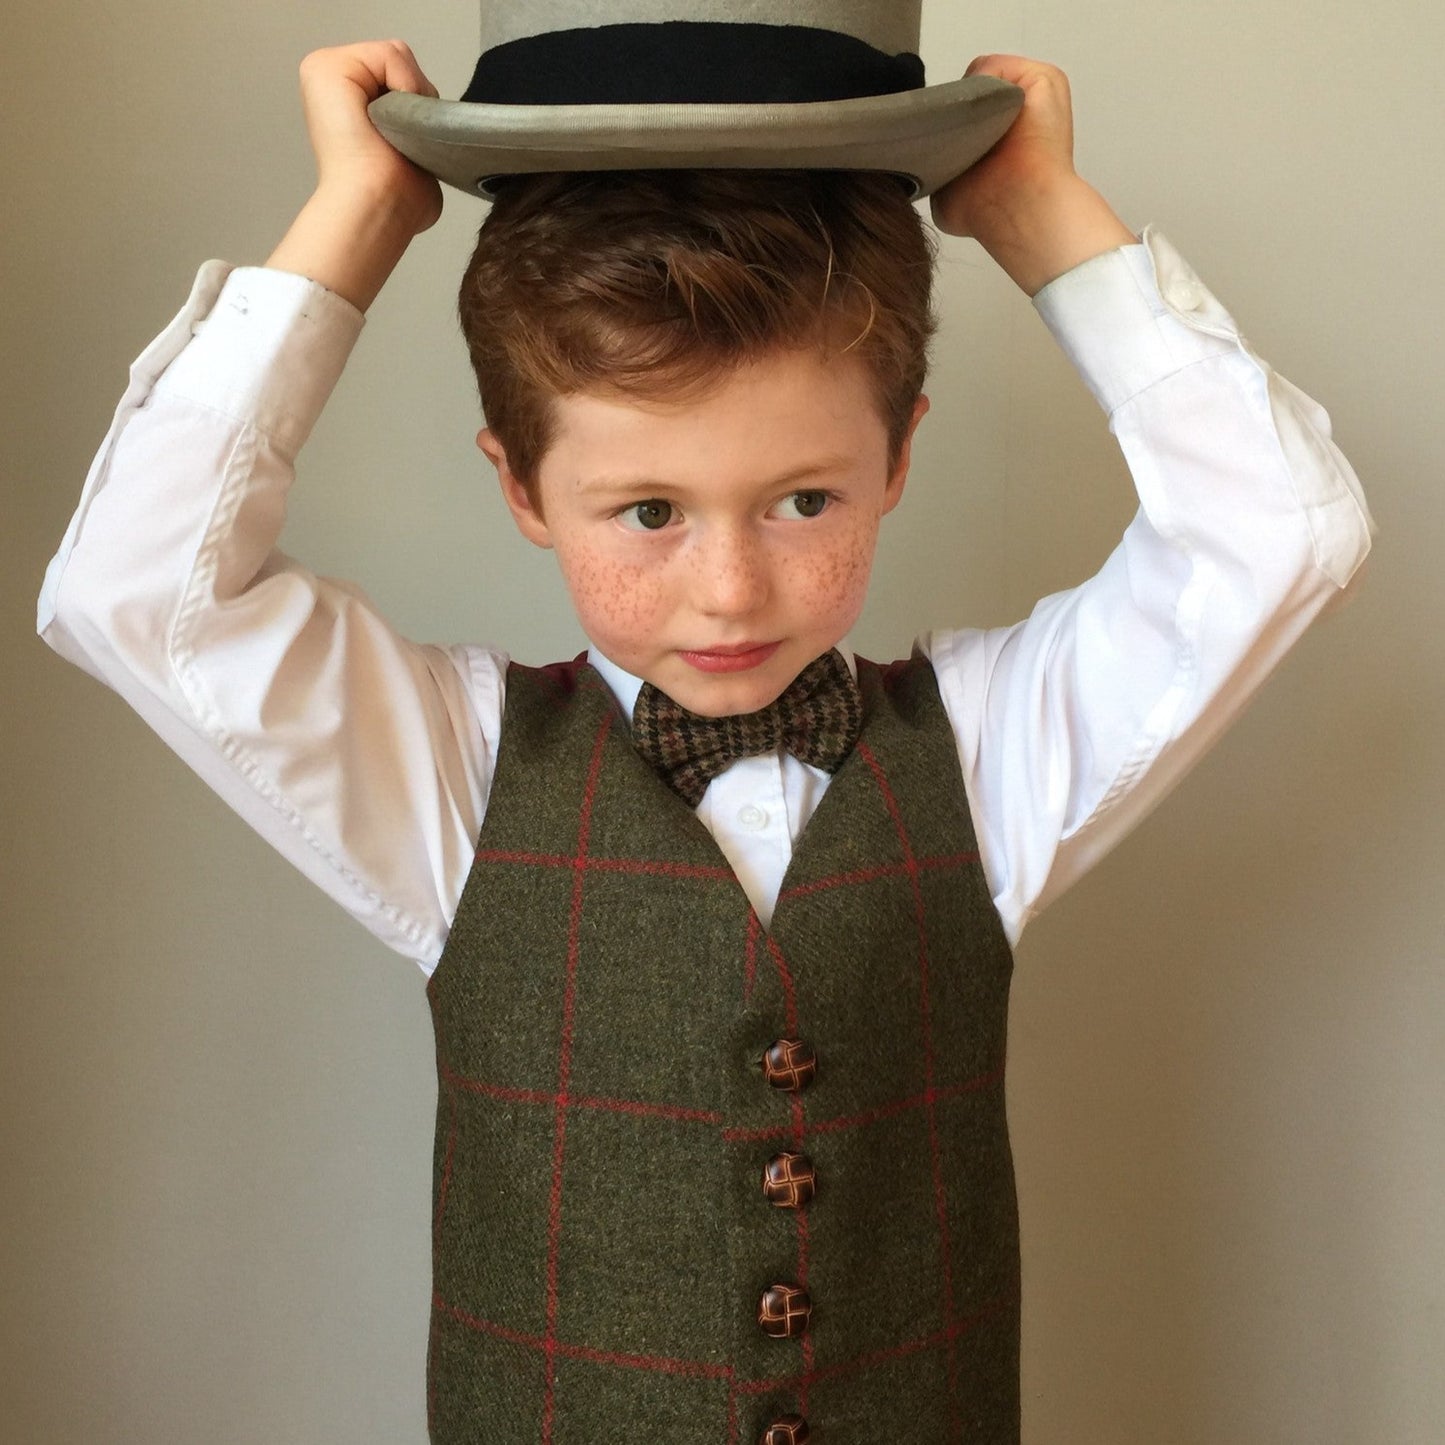 Boys waistcoat, British Tweed waistcoat, pageboy outfit, boys clothing, olive green and red check waistcoat - caractacus potts